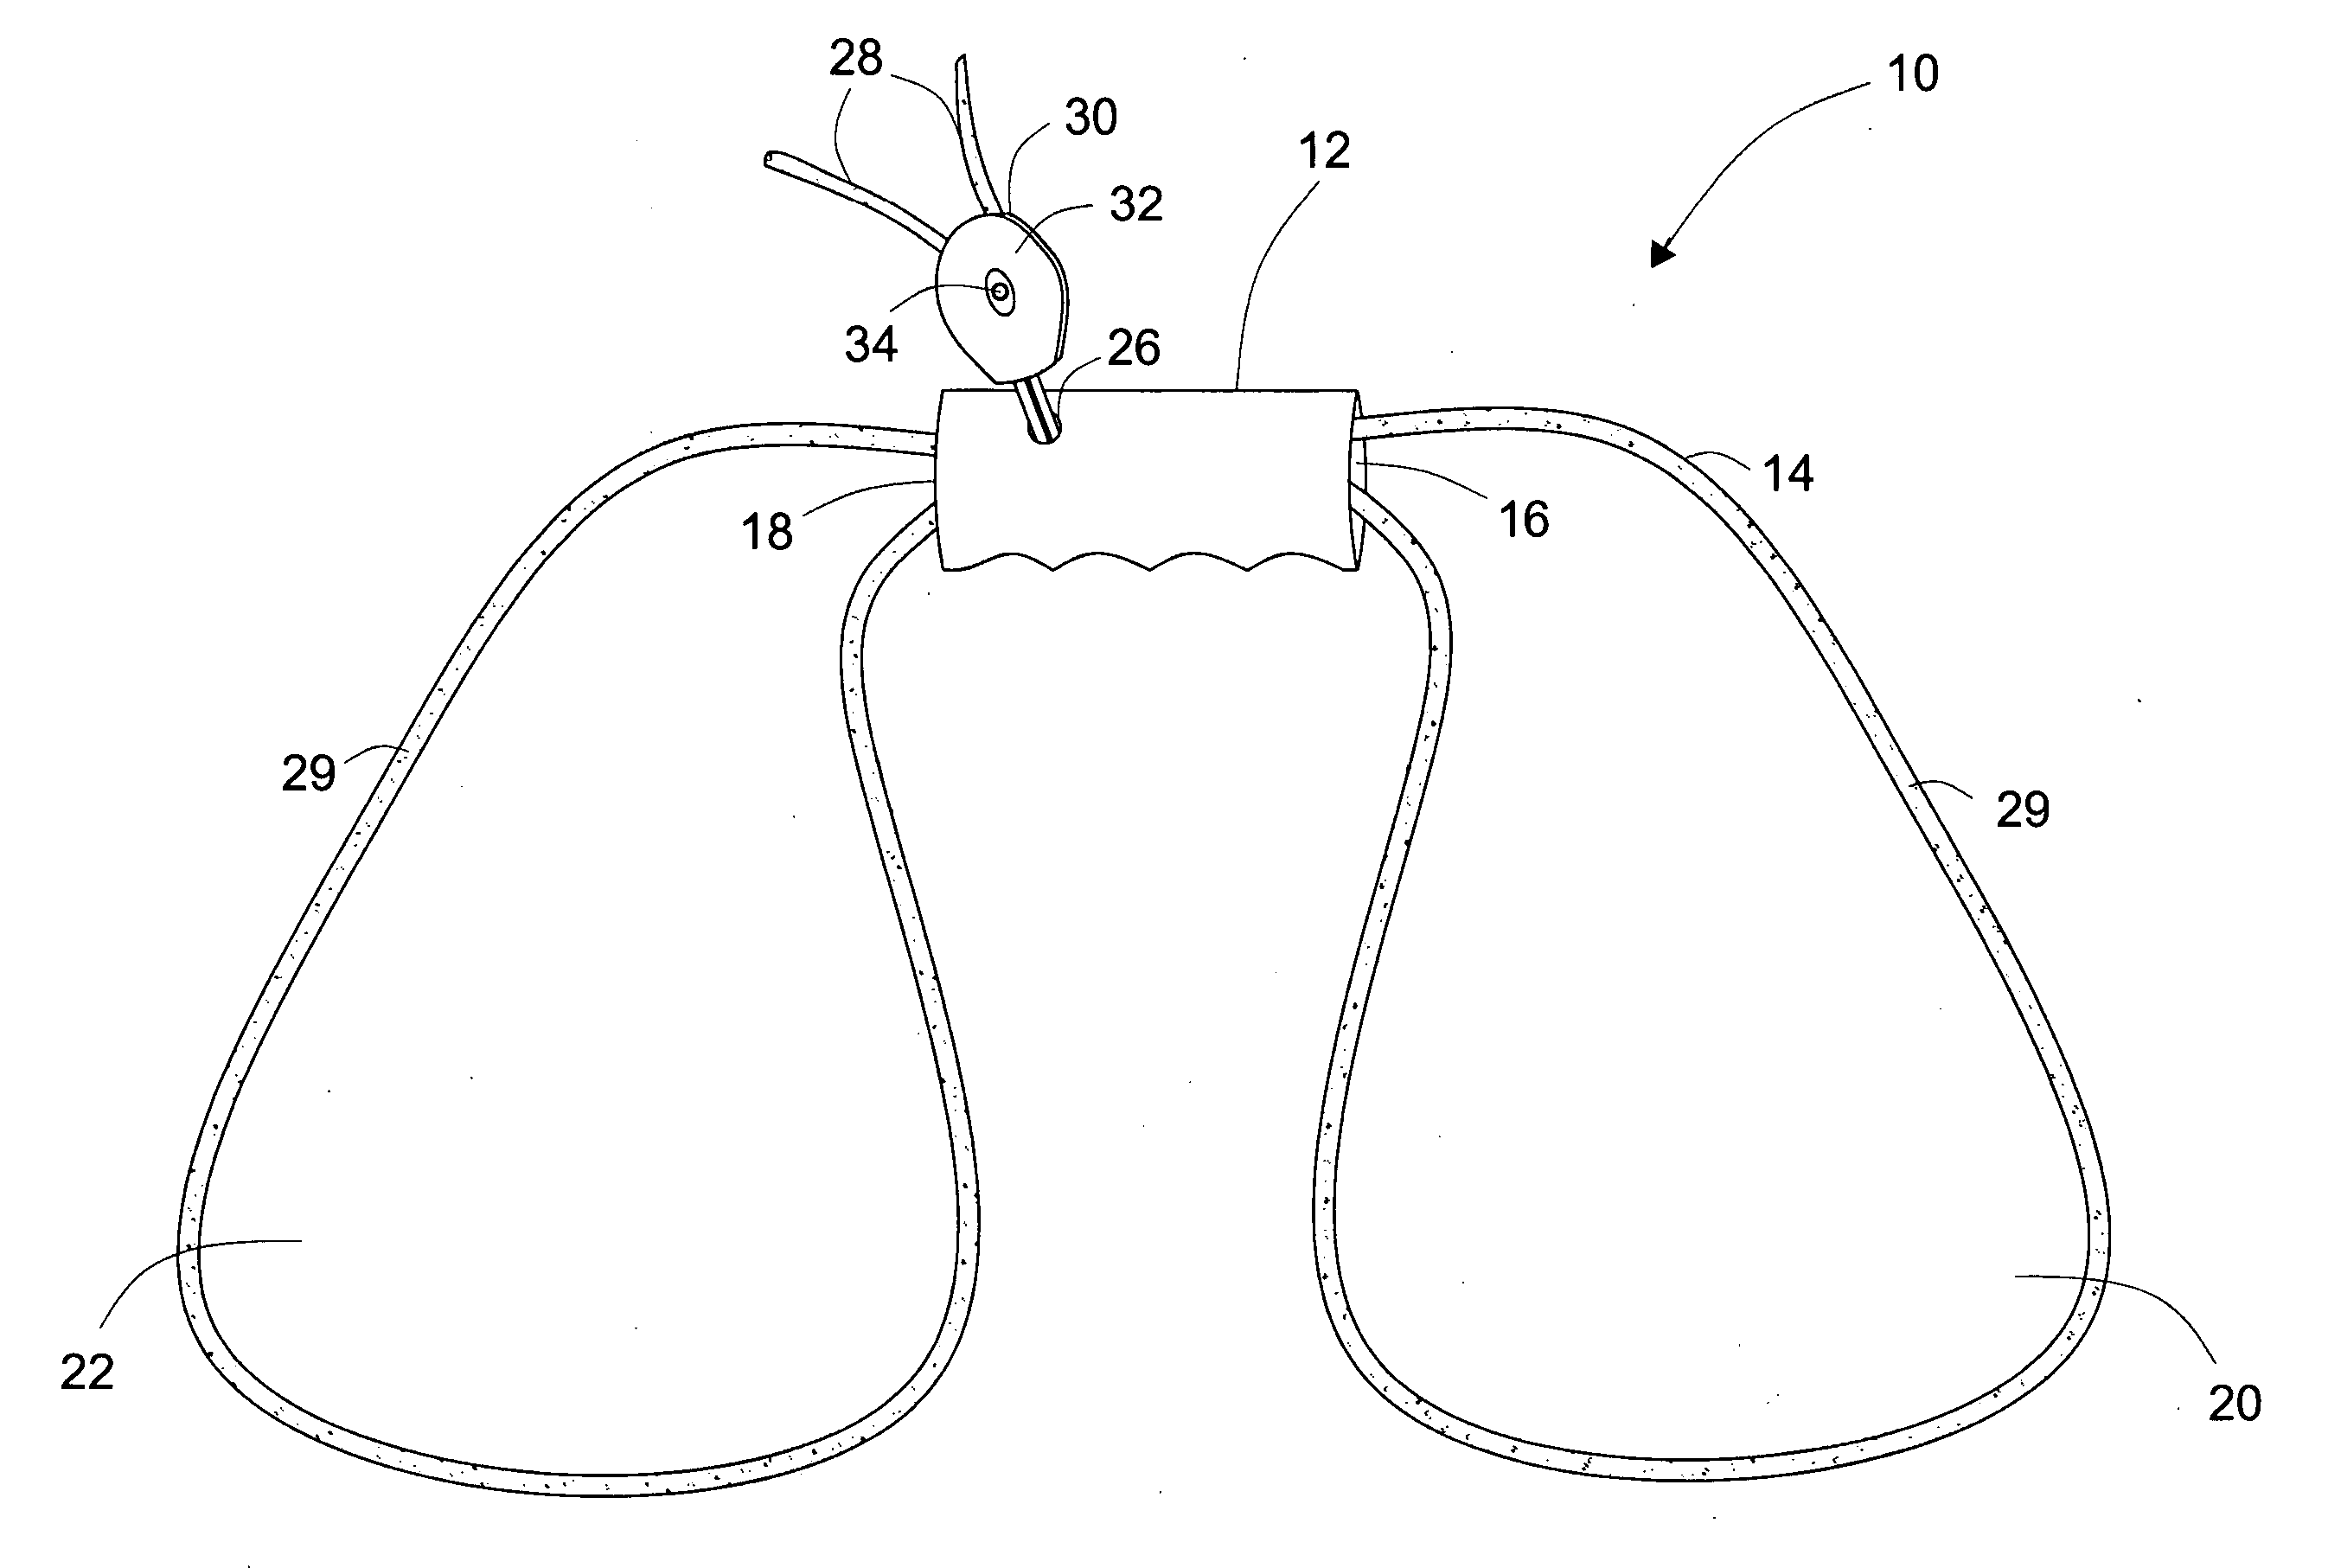 Apparatus and method for facilitating the lifting and carrying of objects without handles